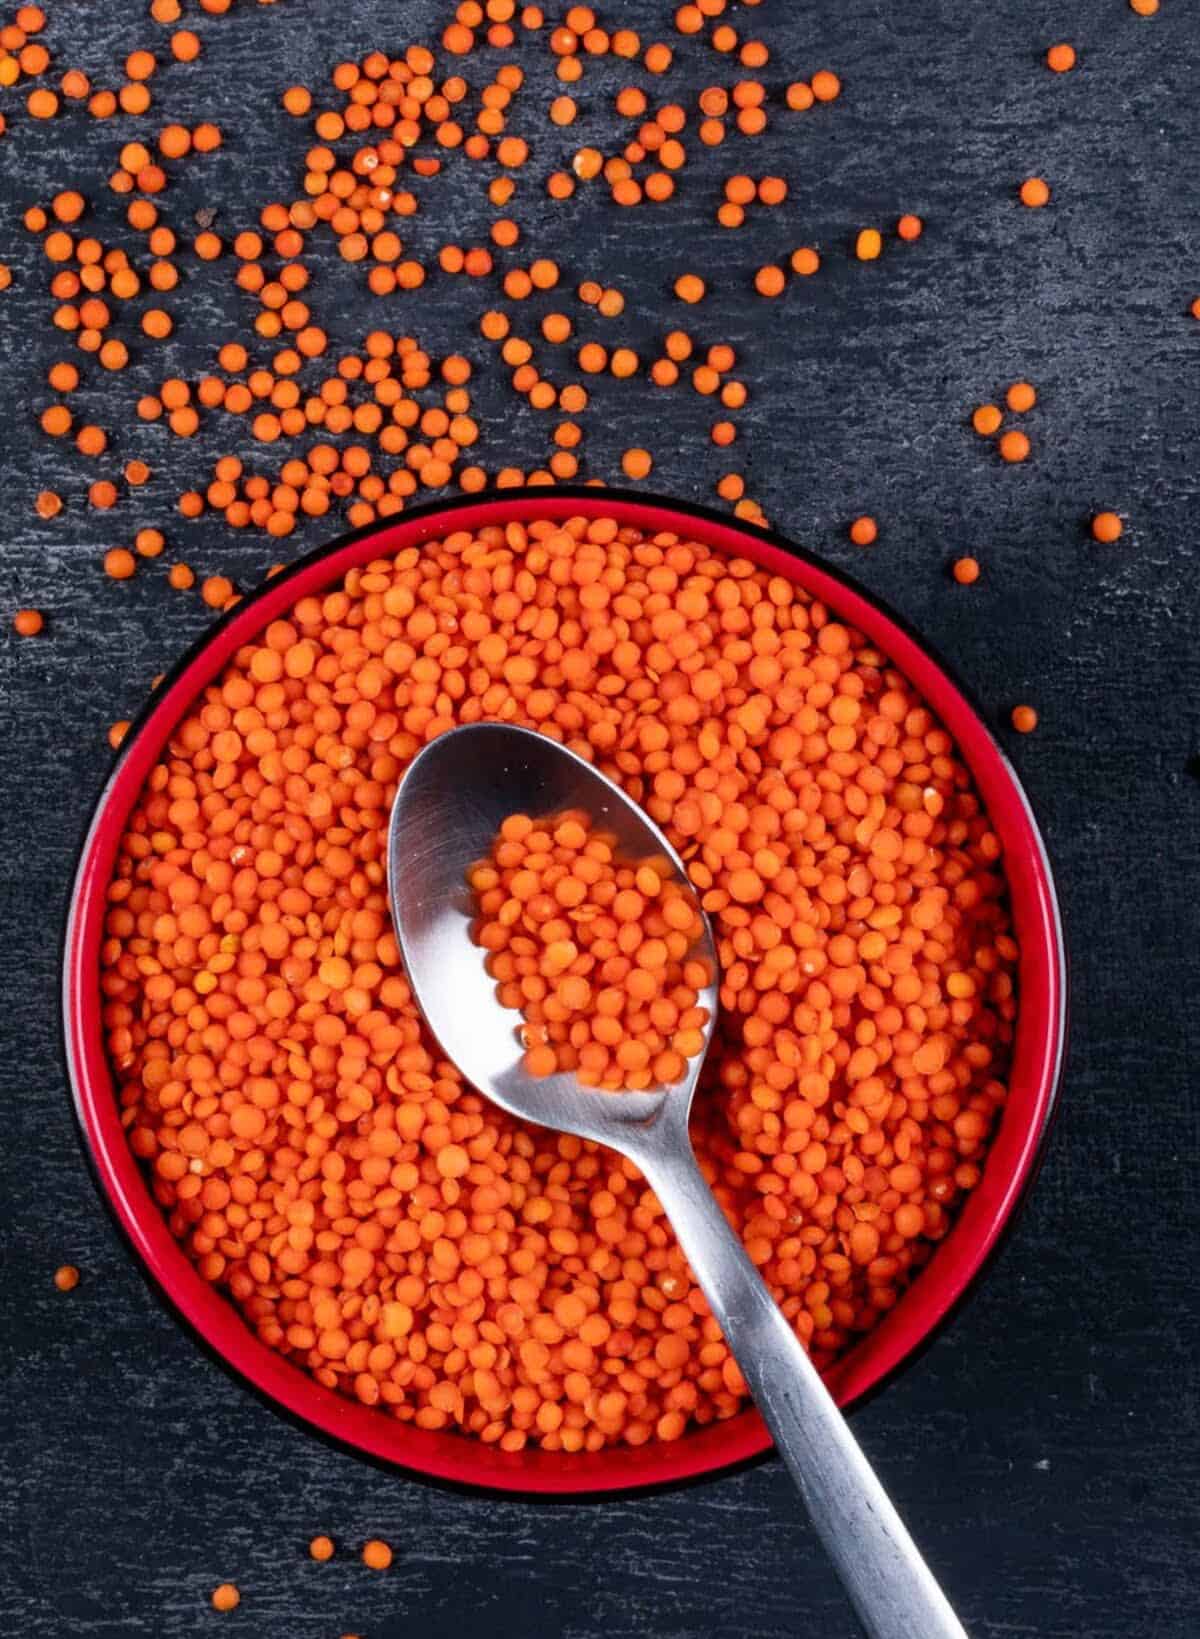 Sabut masoor dal are placed in a round red bowl with a metal spoon scooping some of the lentils from the bowl. The bowl is placed on a dark backdrop.